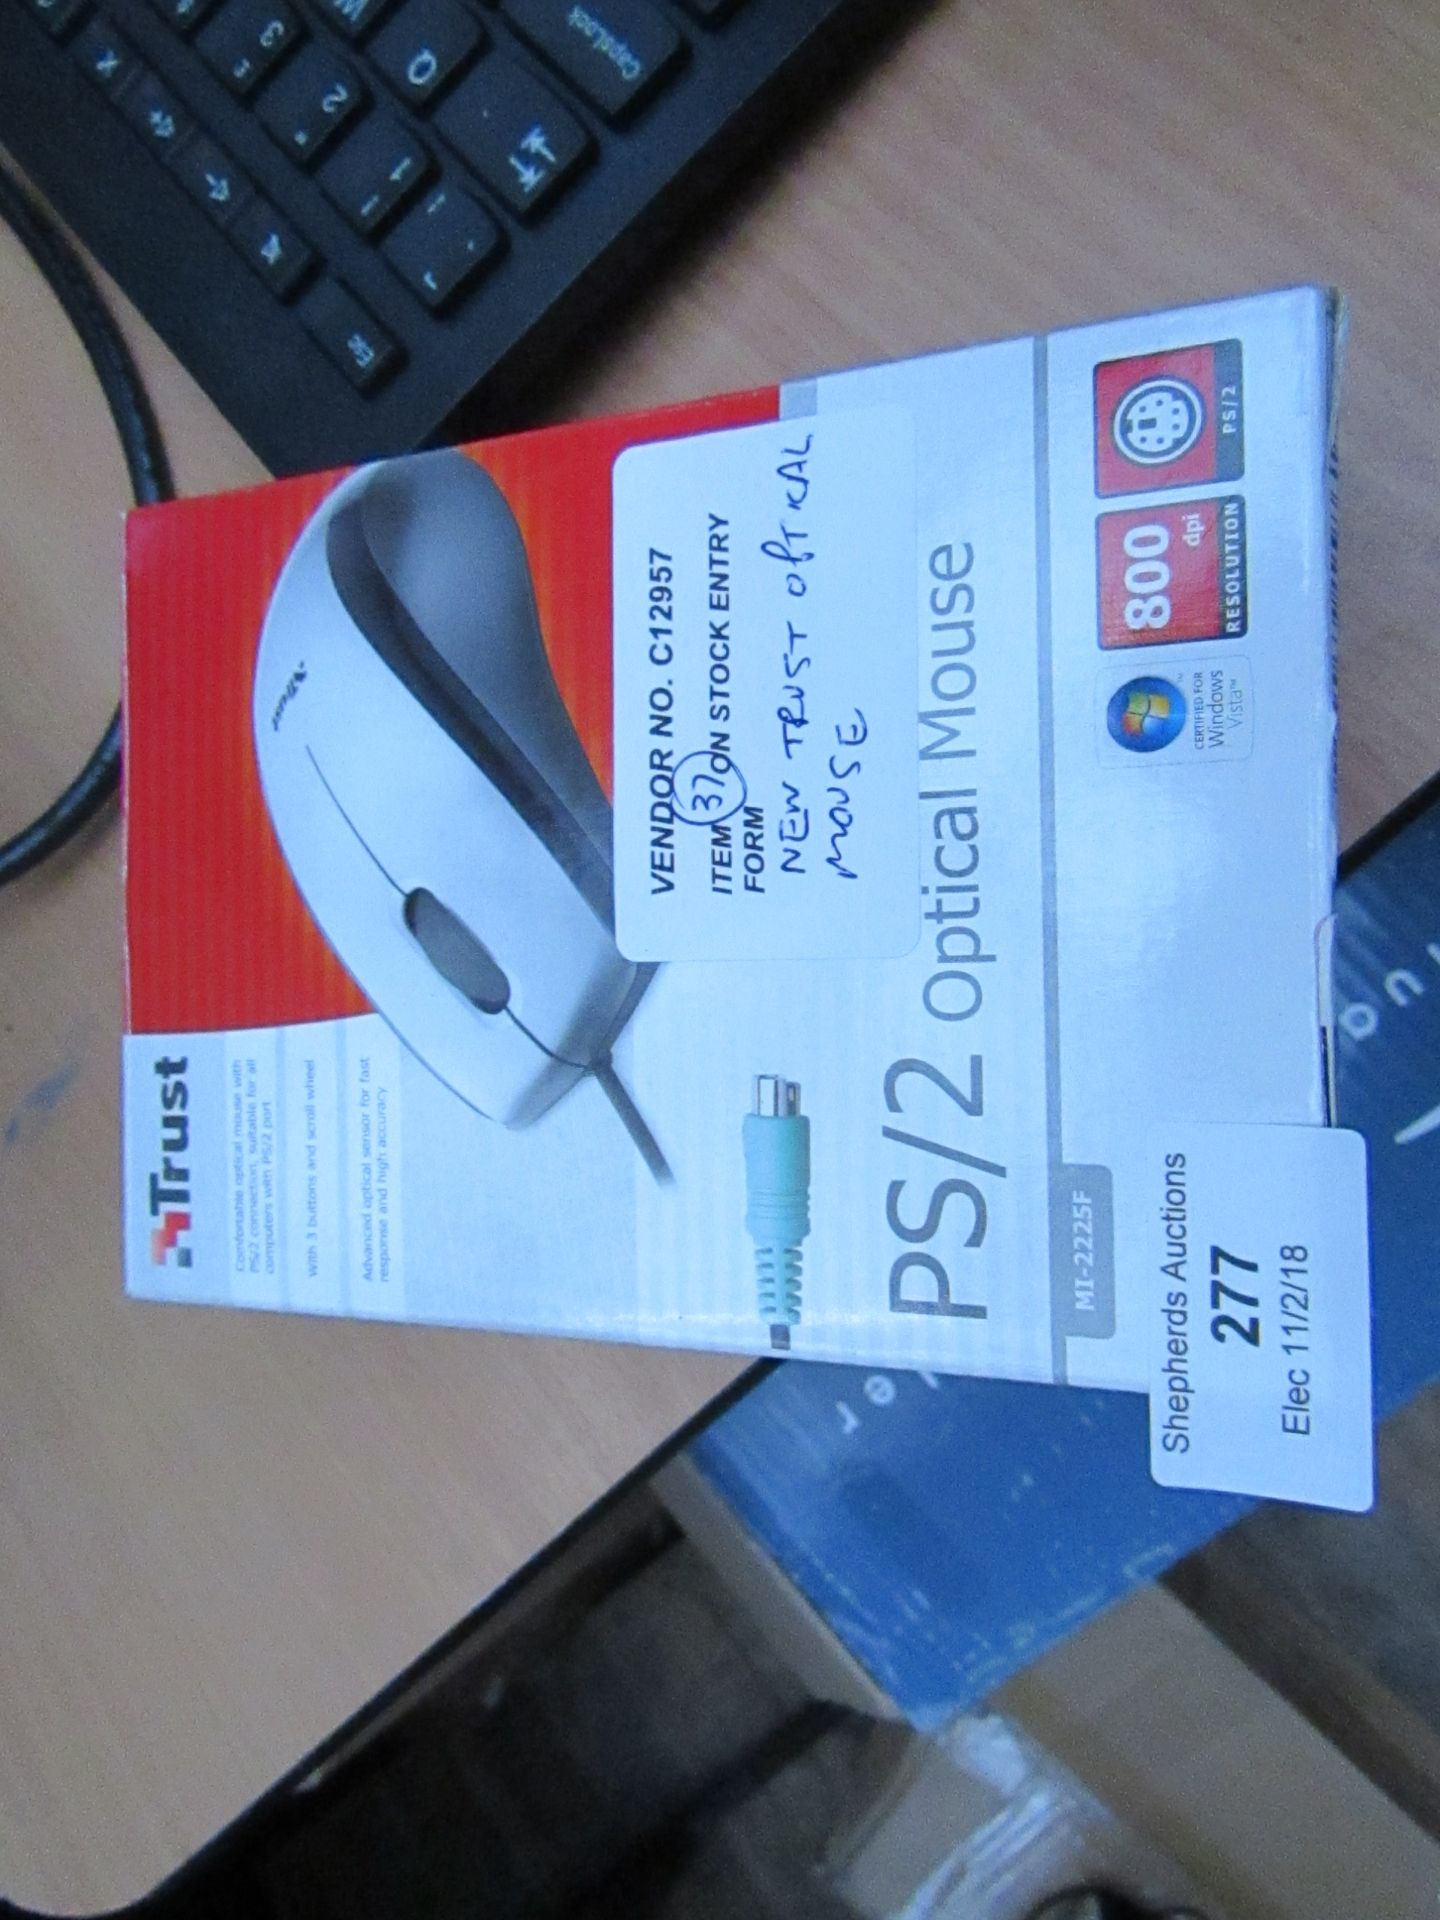 Trust PS/2 optical mouse. New & boxed.